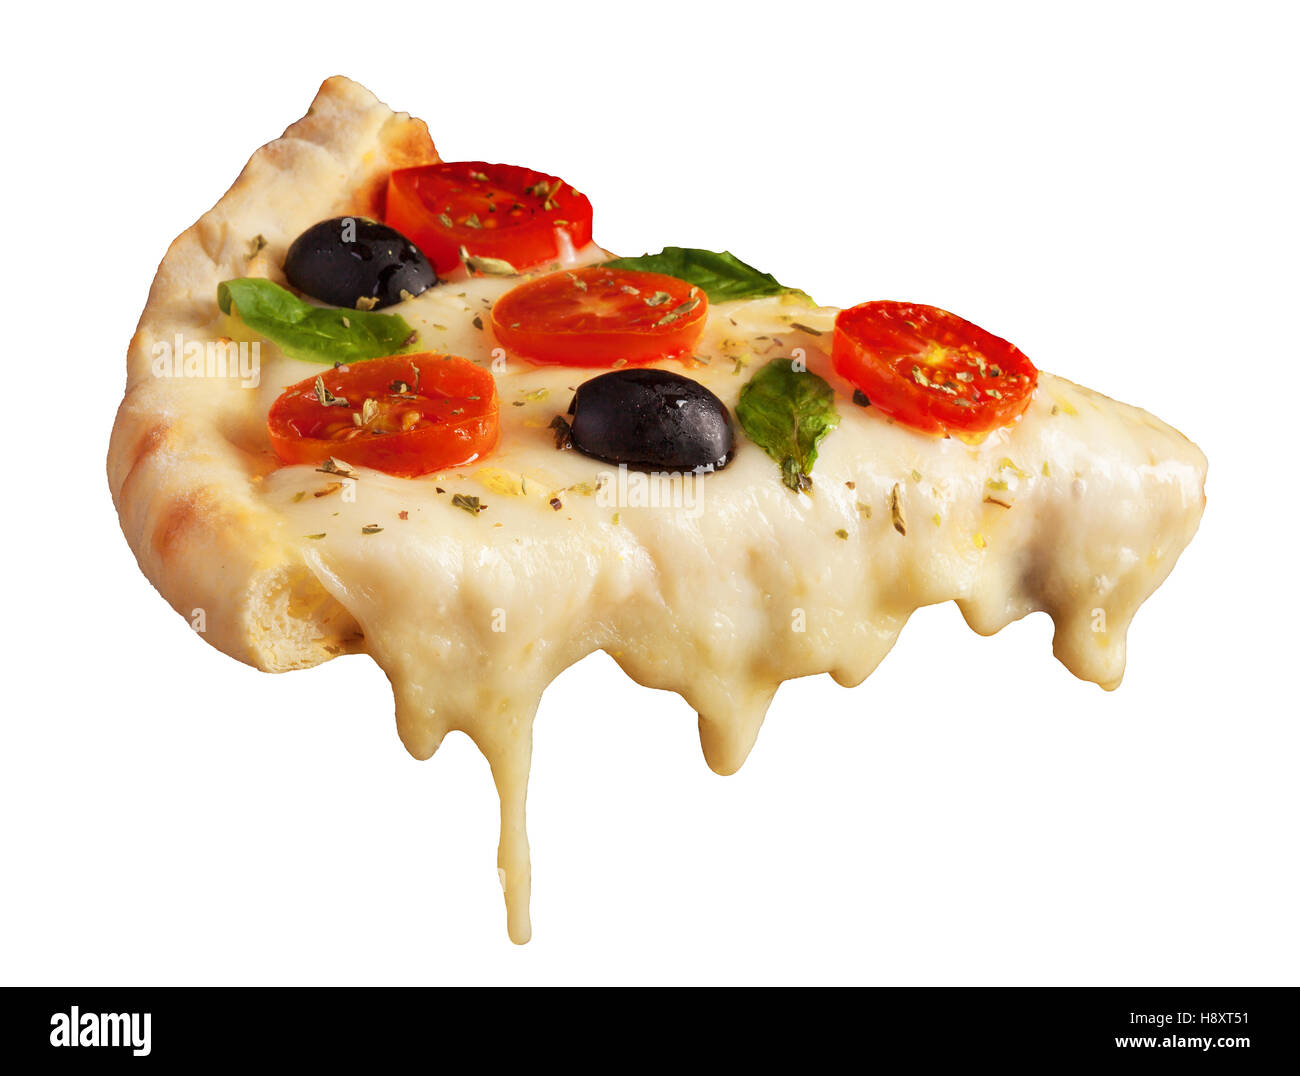 A Hot Pizza Slice With Dripping Melted Cheese Isolated On White Stock